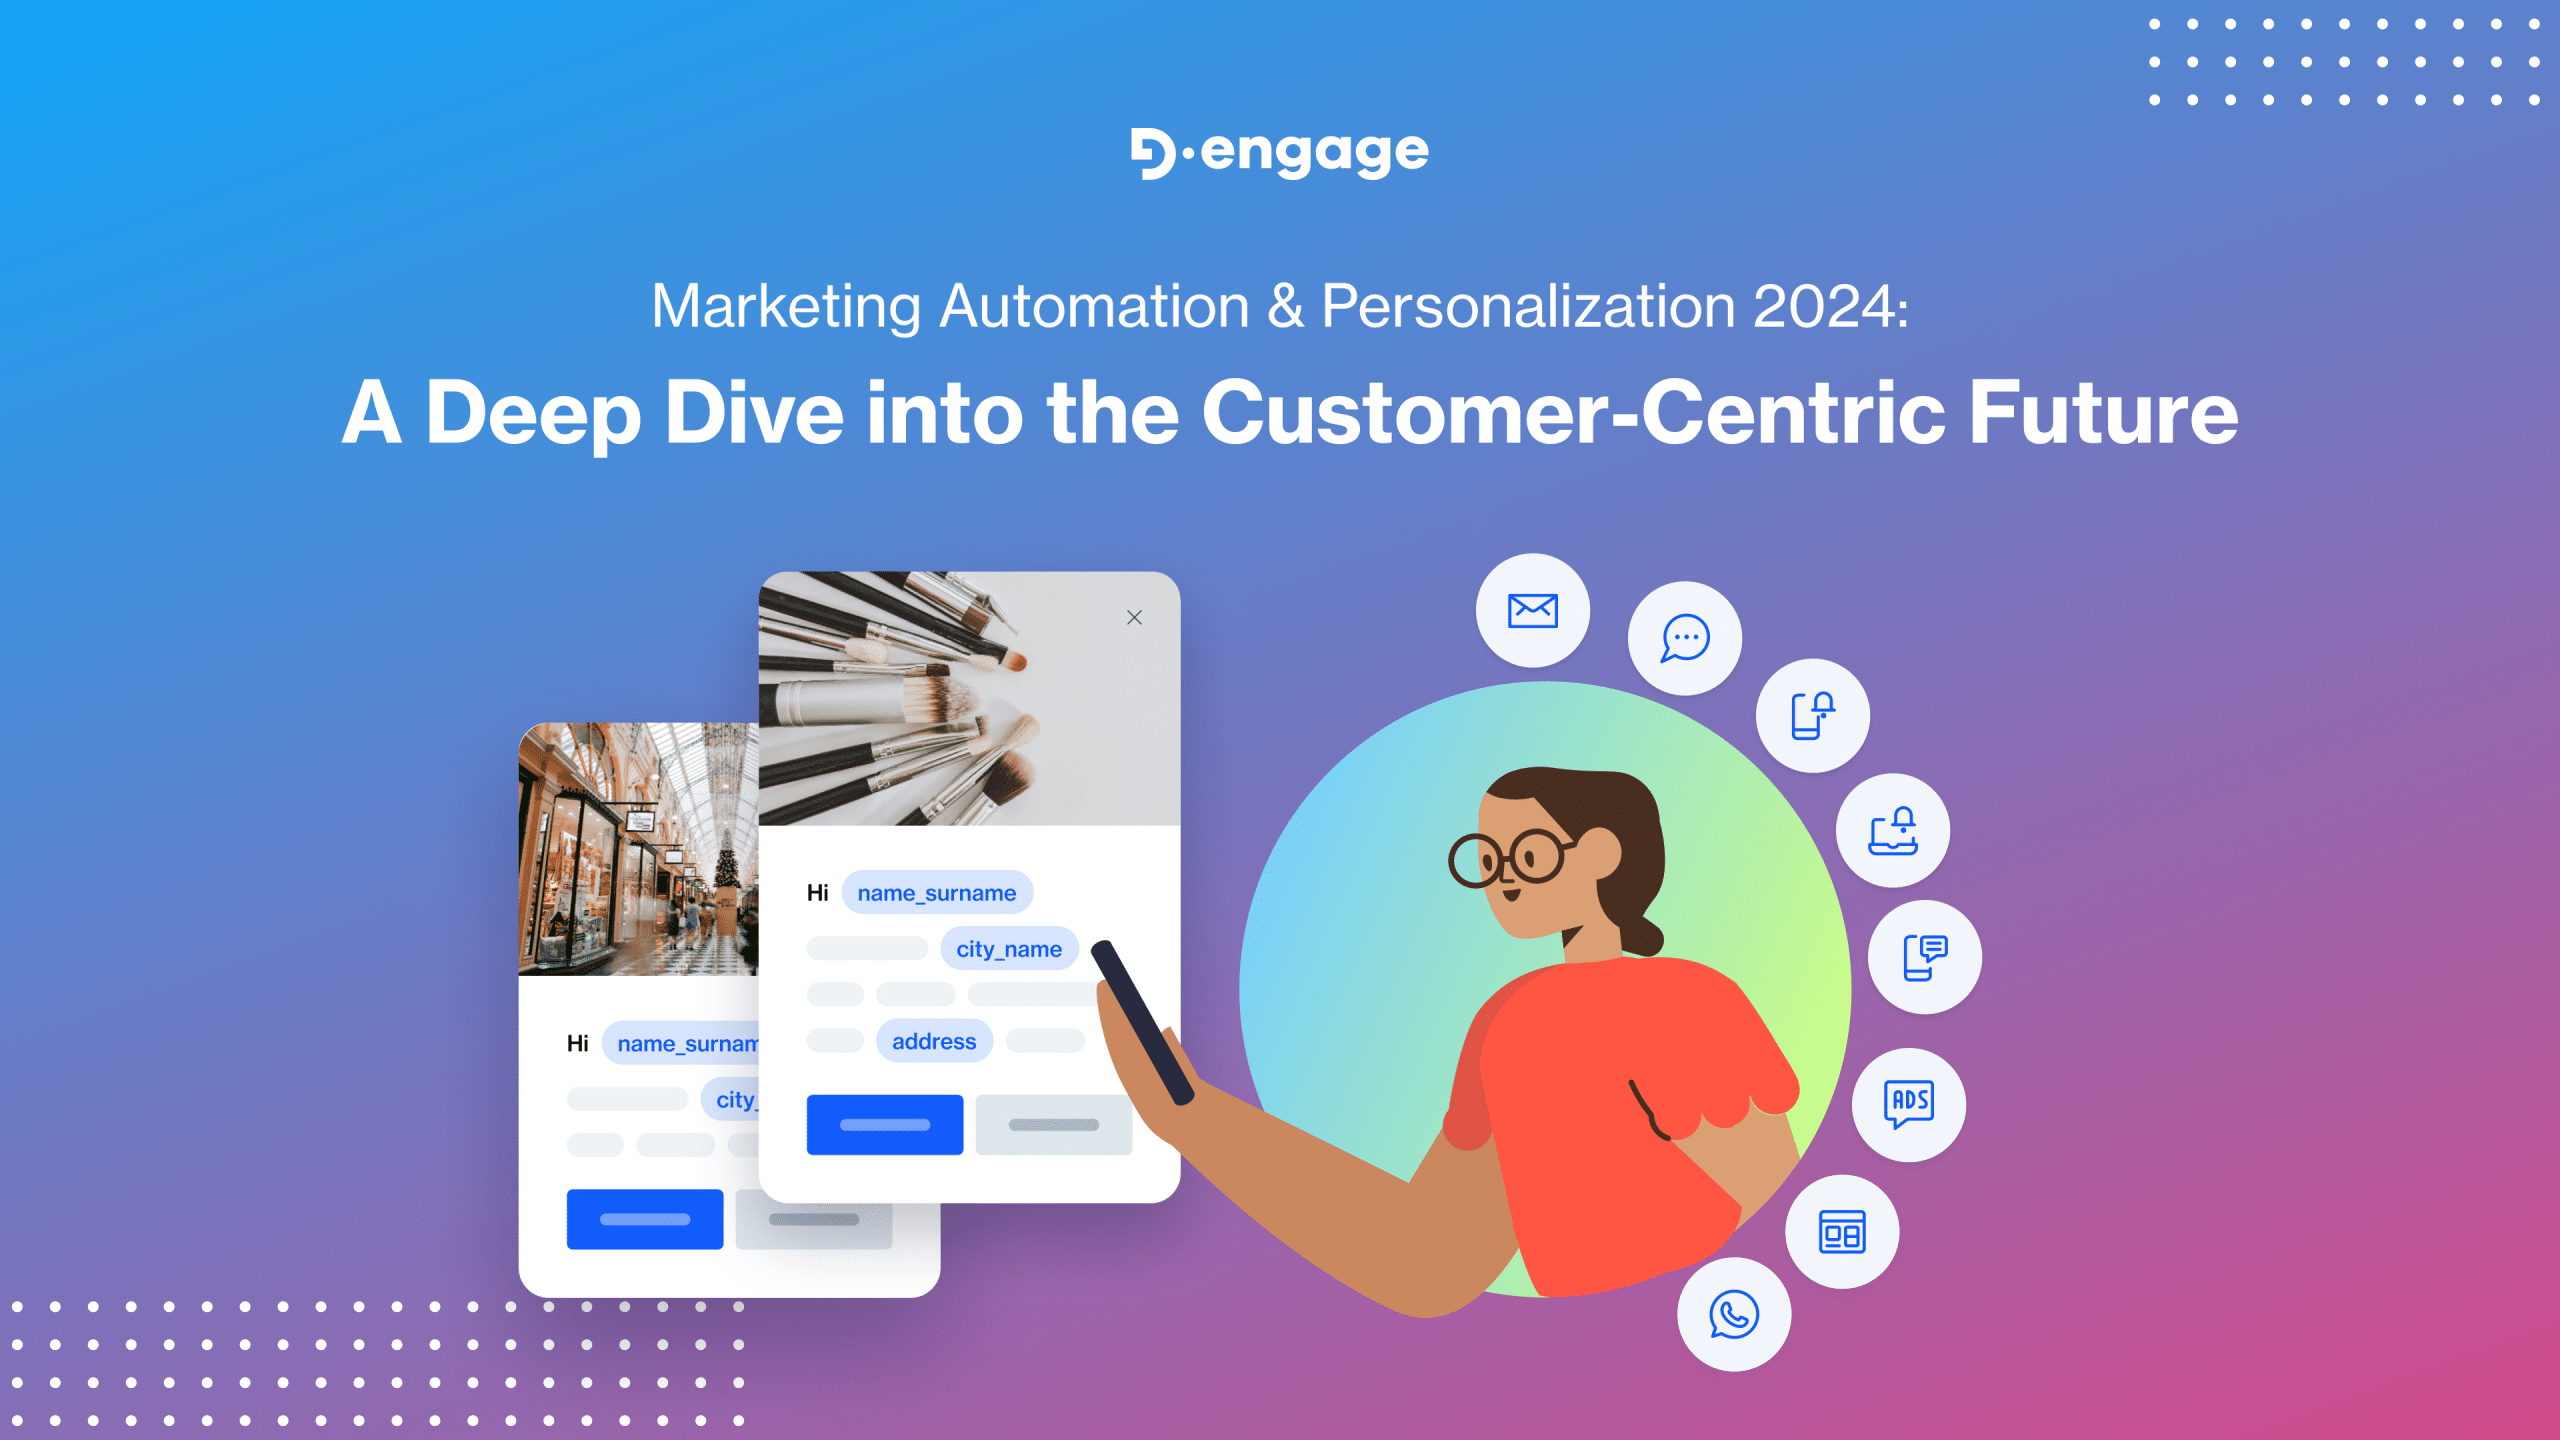 Marketing Automation & Personalization 2024: A Deep Dive into the Customer-Centric Future